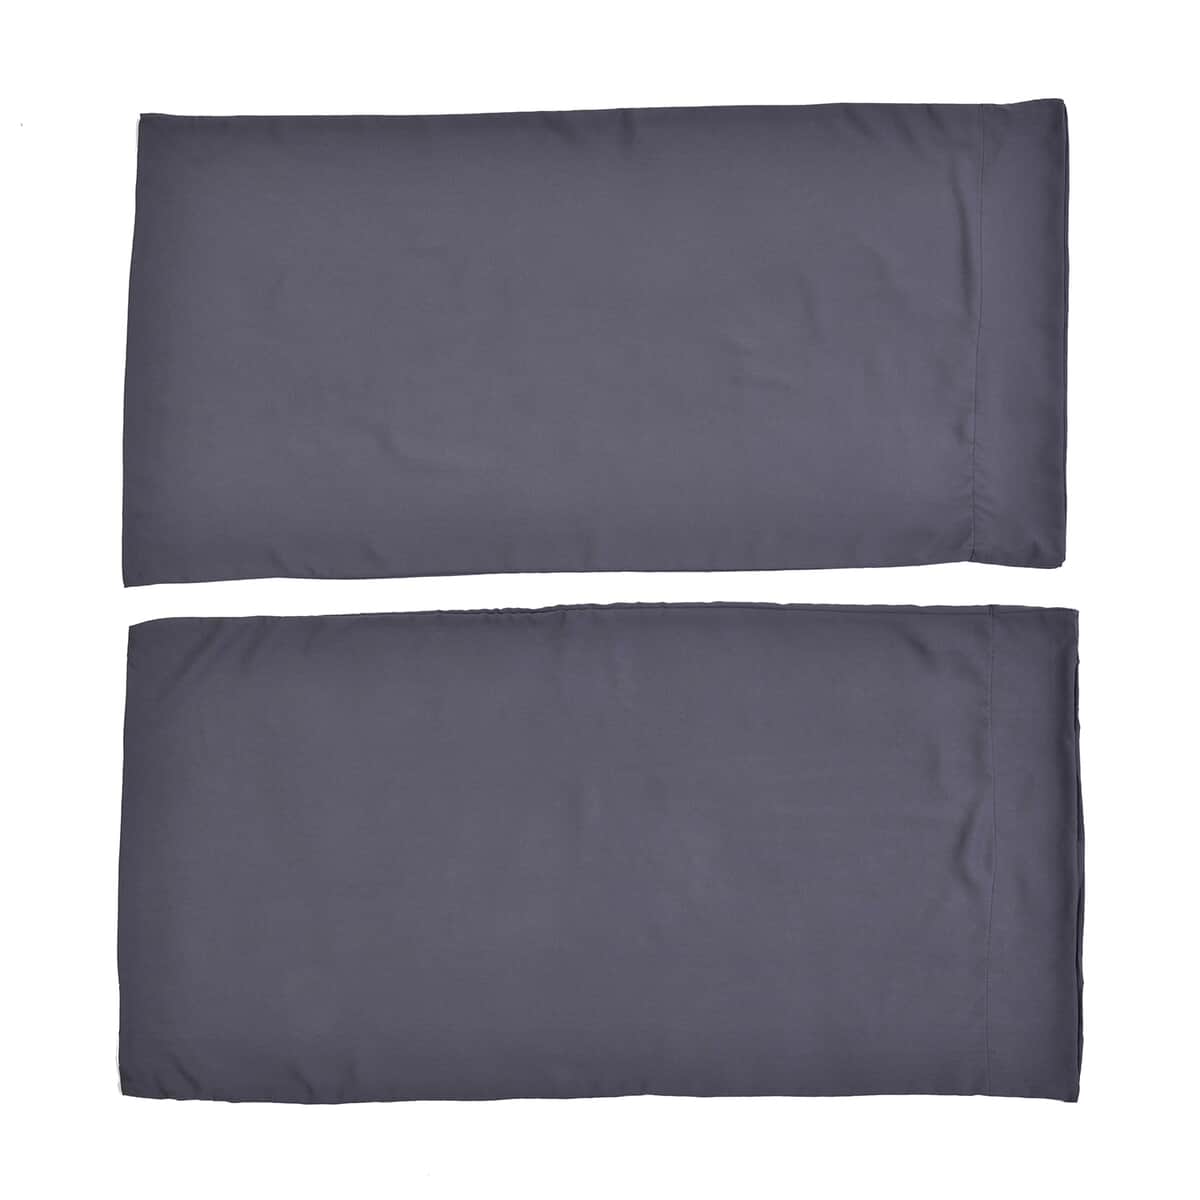 Homesmart Set of 2 Dark Gray Soft and Comfortable Copper Infused Pillowcase (Queen) image number 5